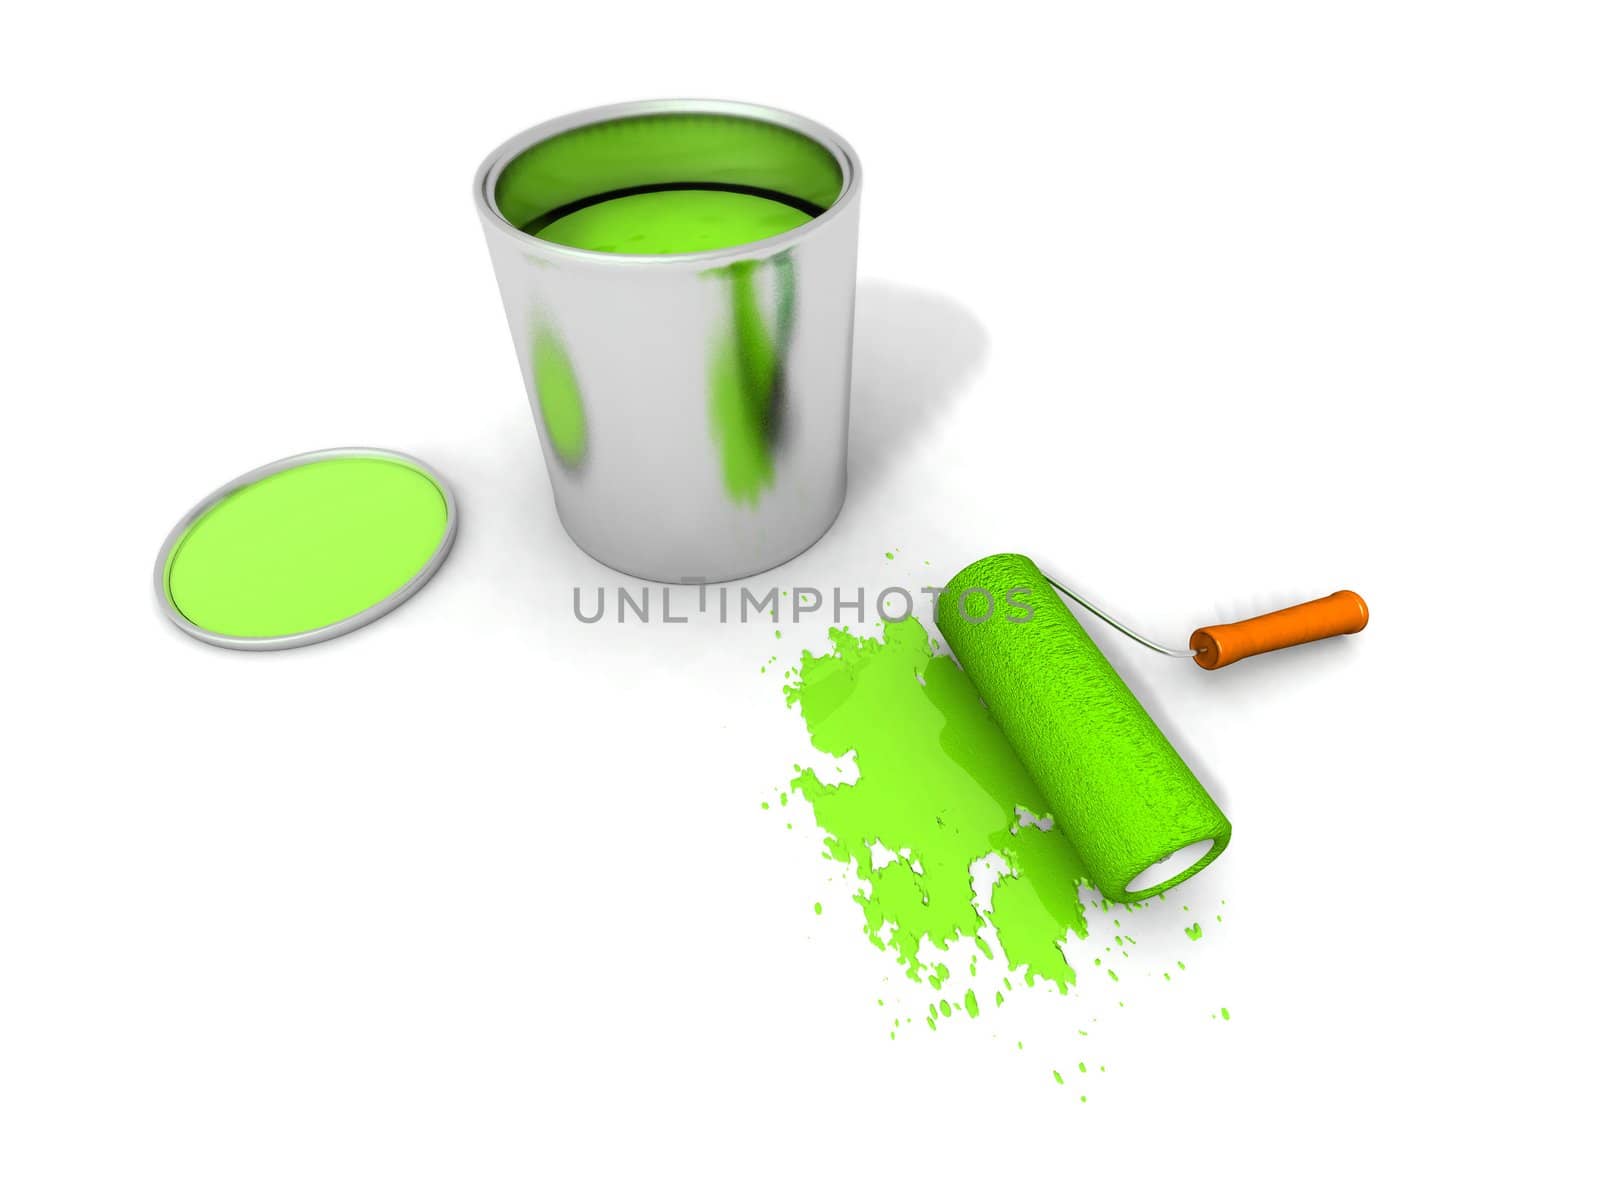 paint roller, green paint can and splashing by jbouzou